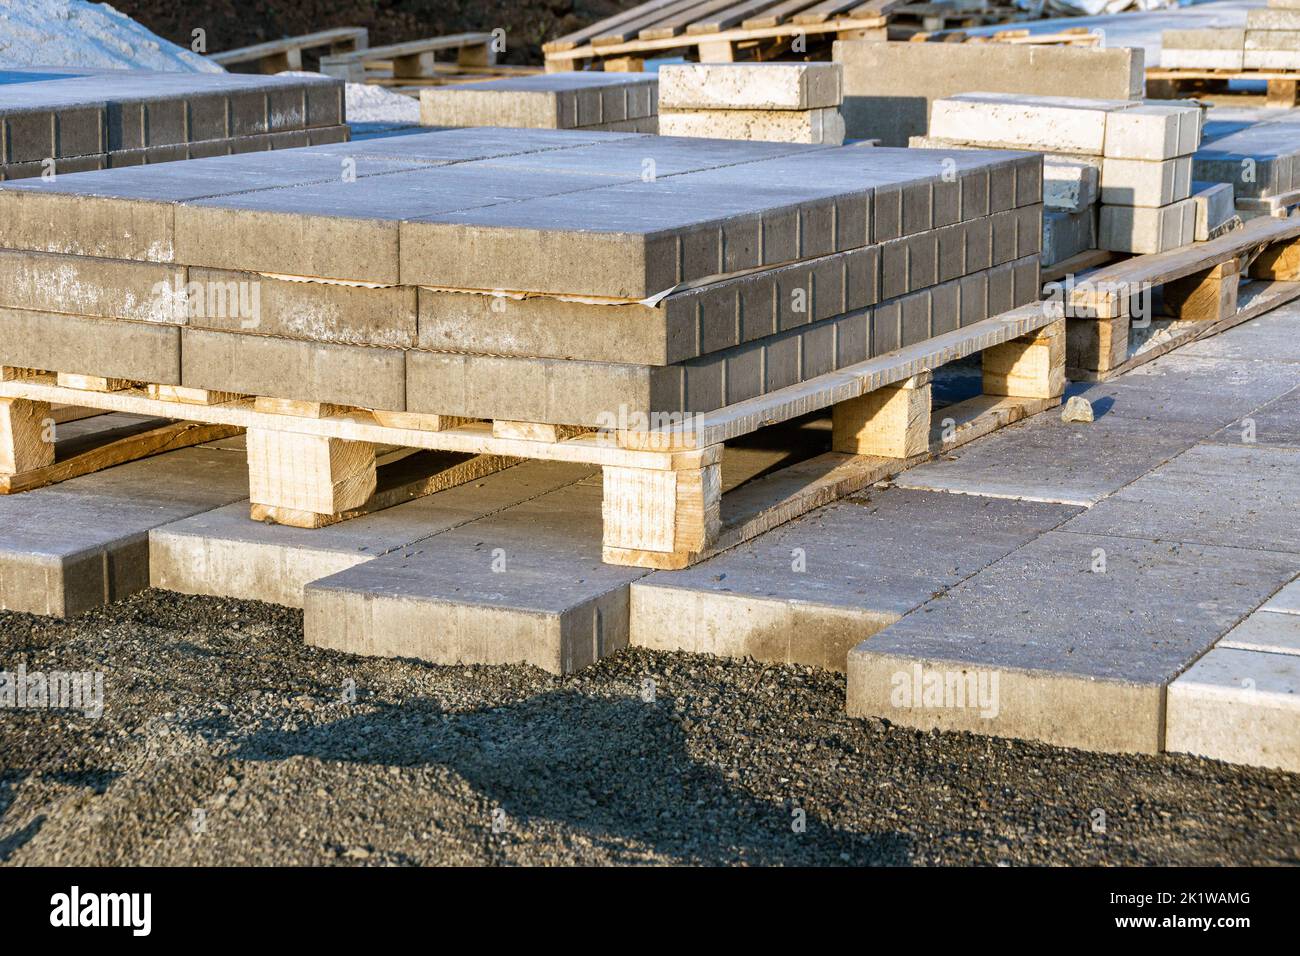 paving slabs made of artificial stone lie on pallets standing on the finished path, preparing the base and providing drainage for laying paving slabs, Stock Photo